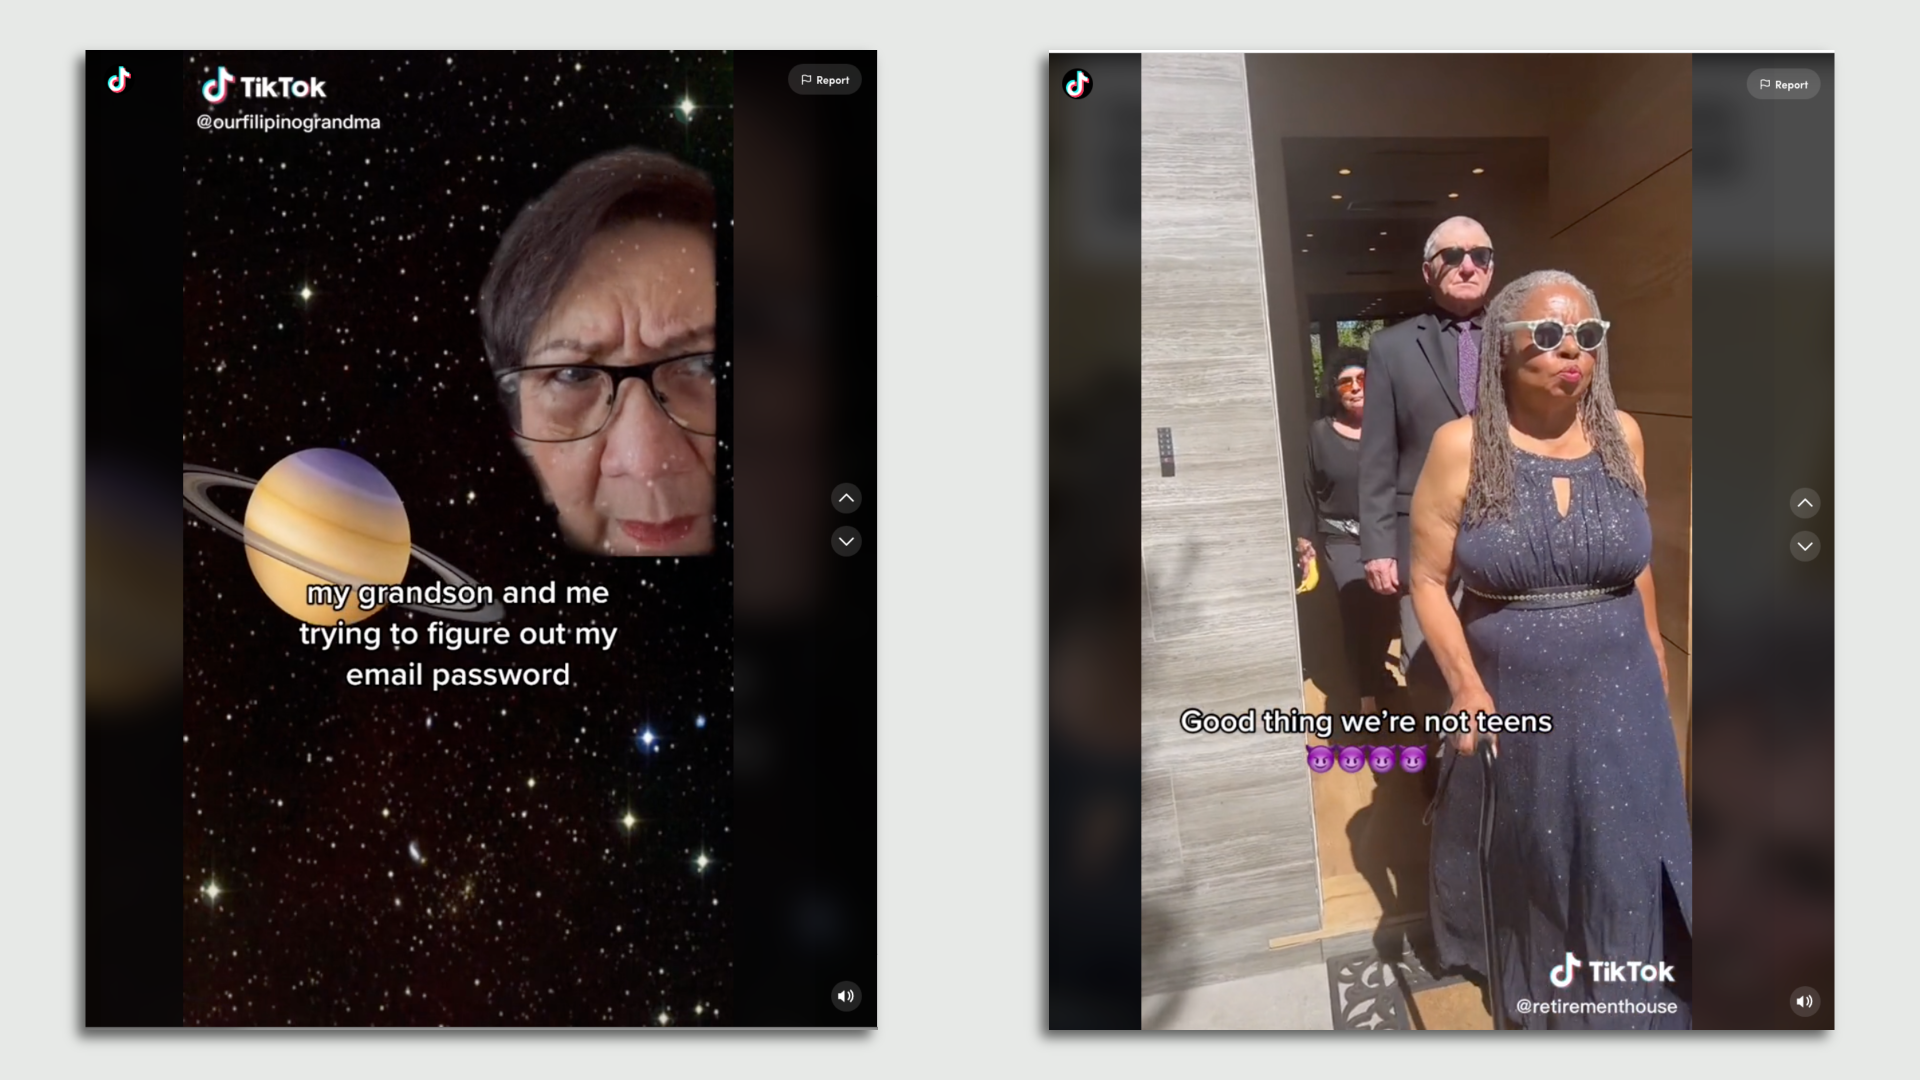 screenshot of a grandmother wearing glasses against a background of stars